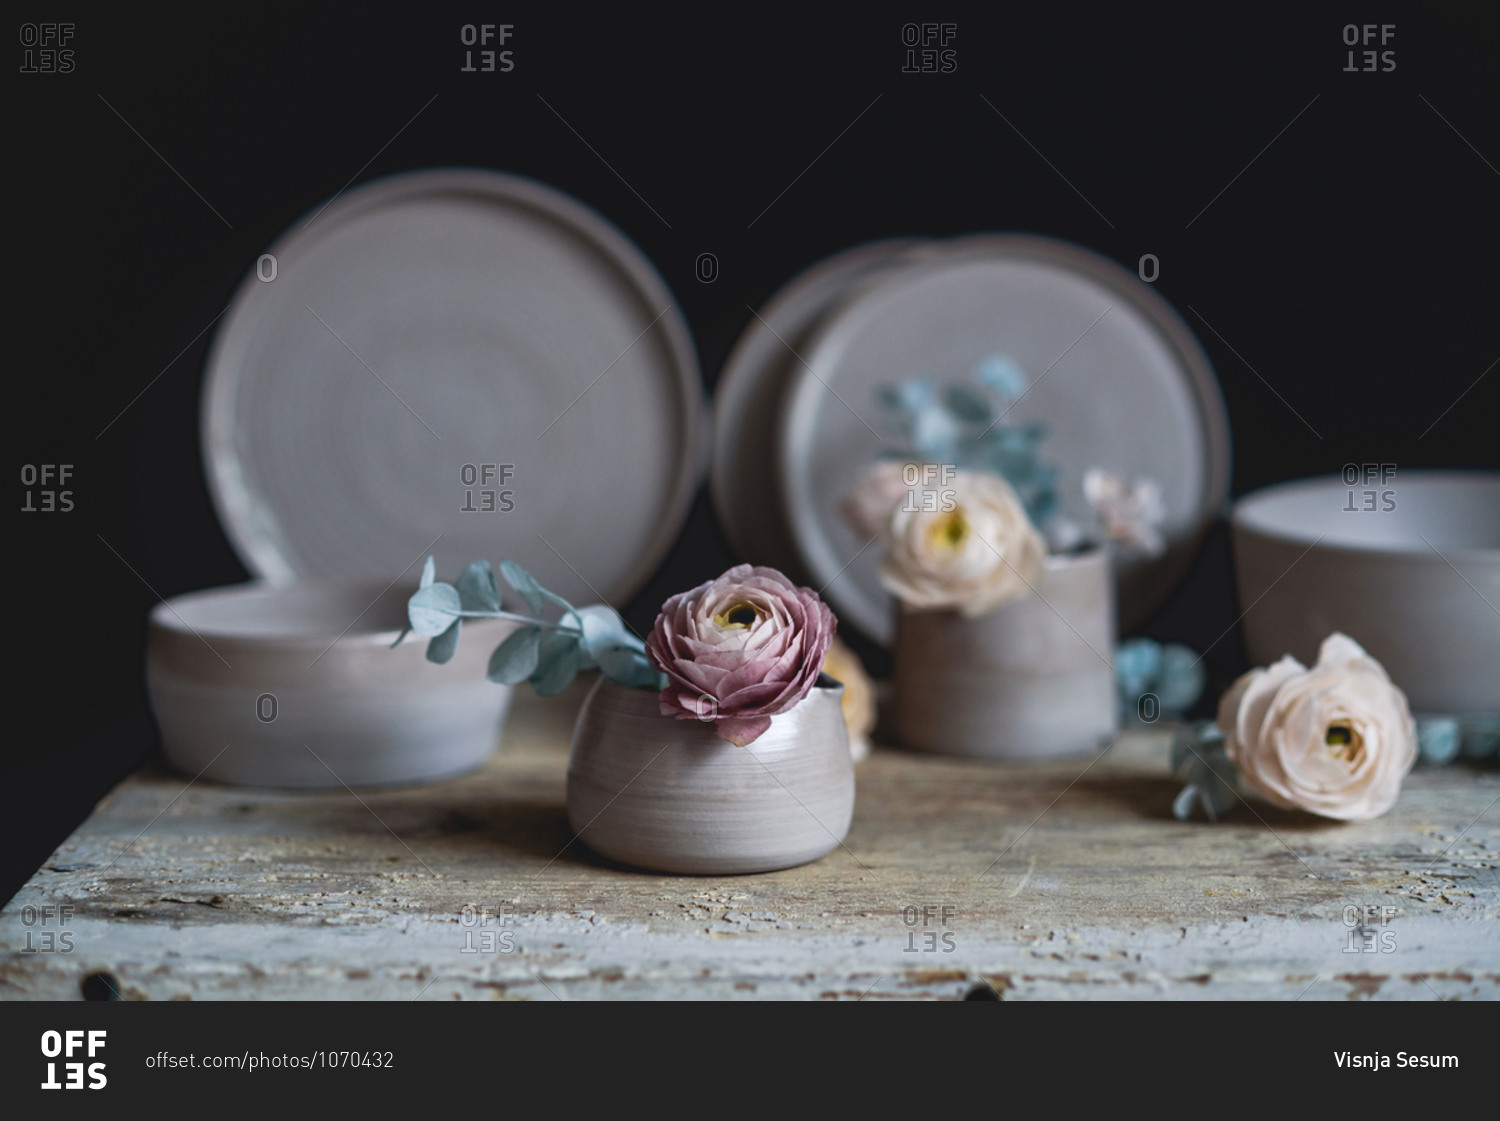 Handmade ceramic cup with flowers inside